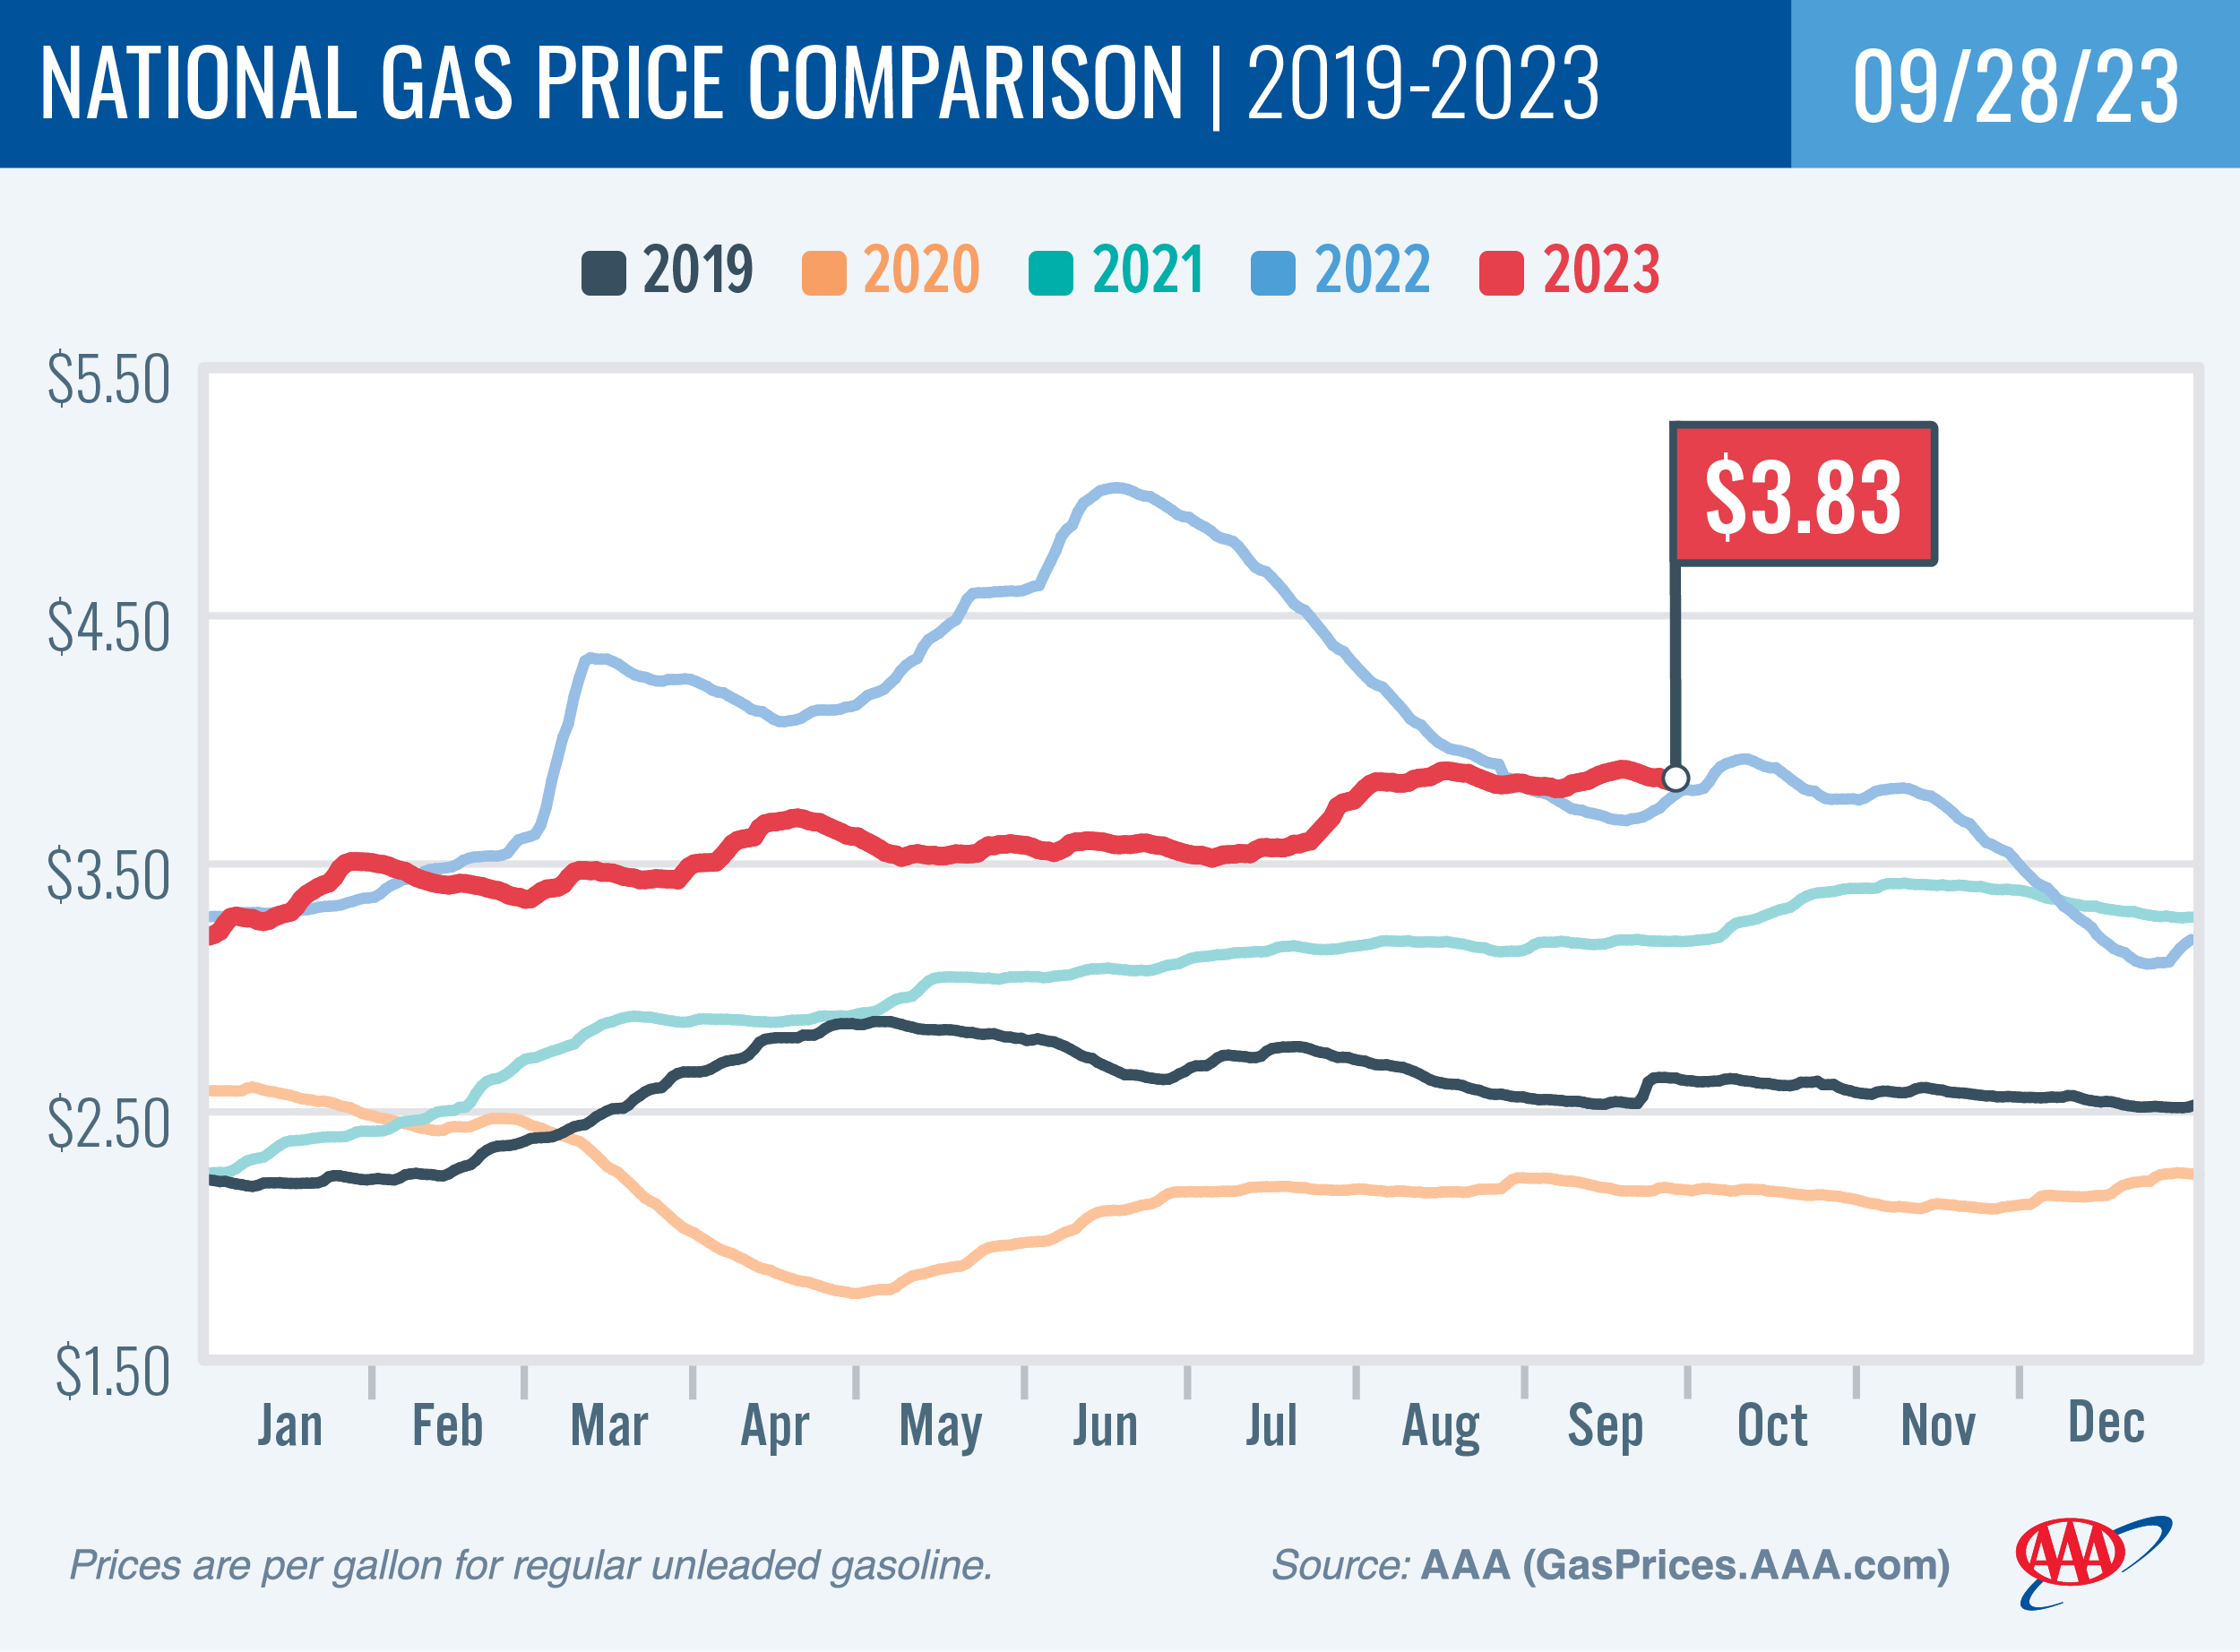 National Gas Price Comparison for September 28, 2023